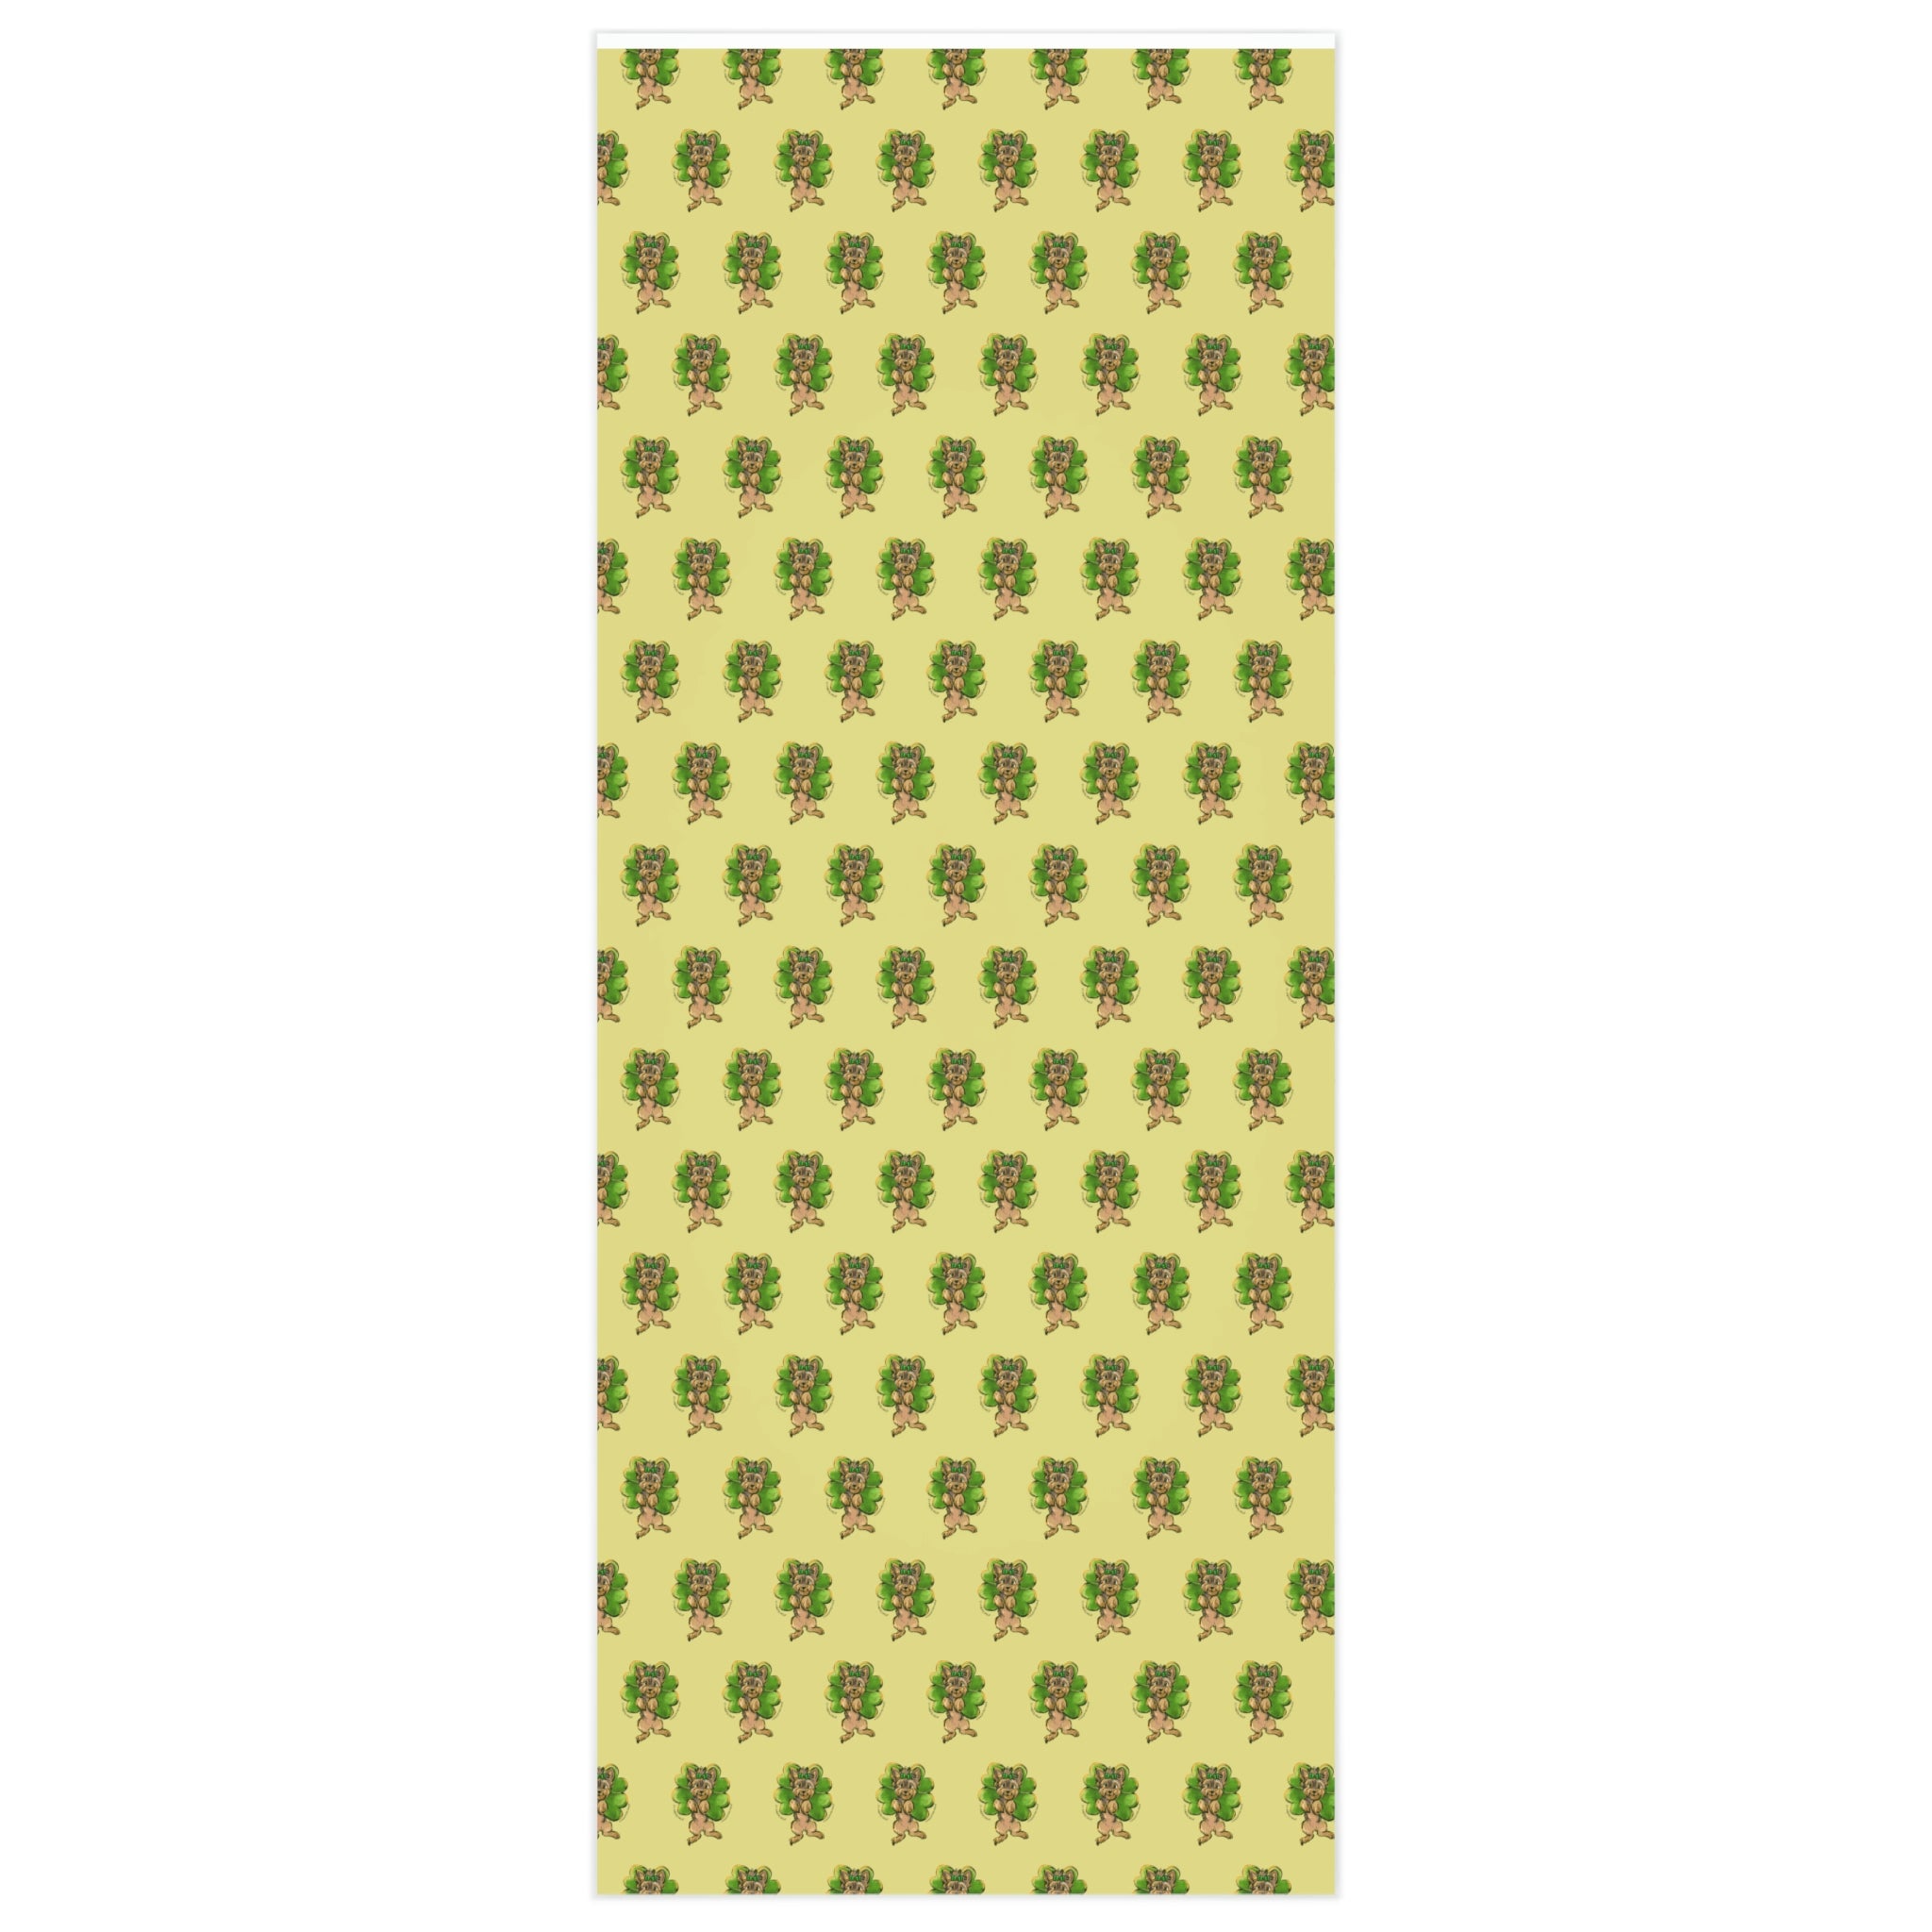 Wrapping Paper - 8459